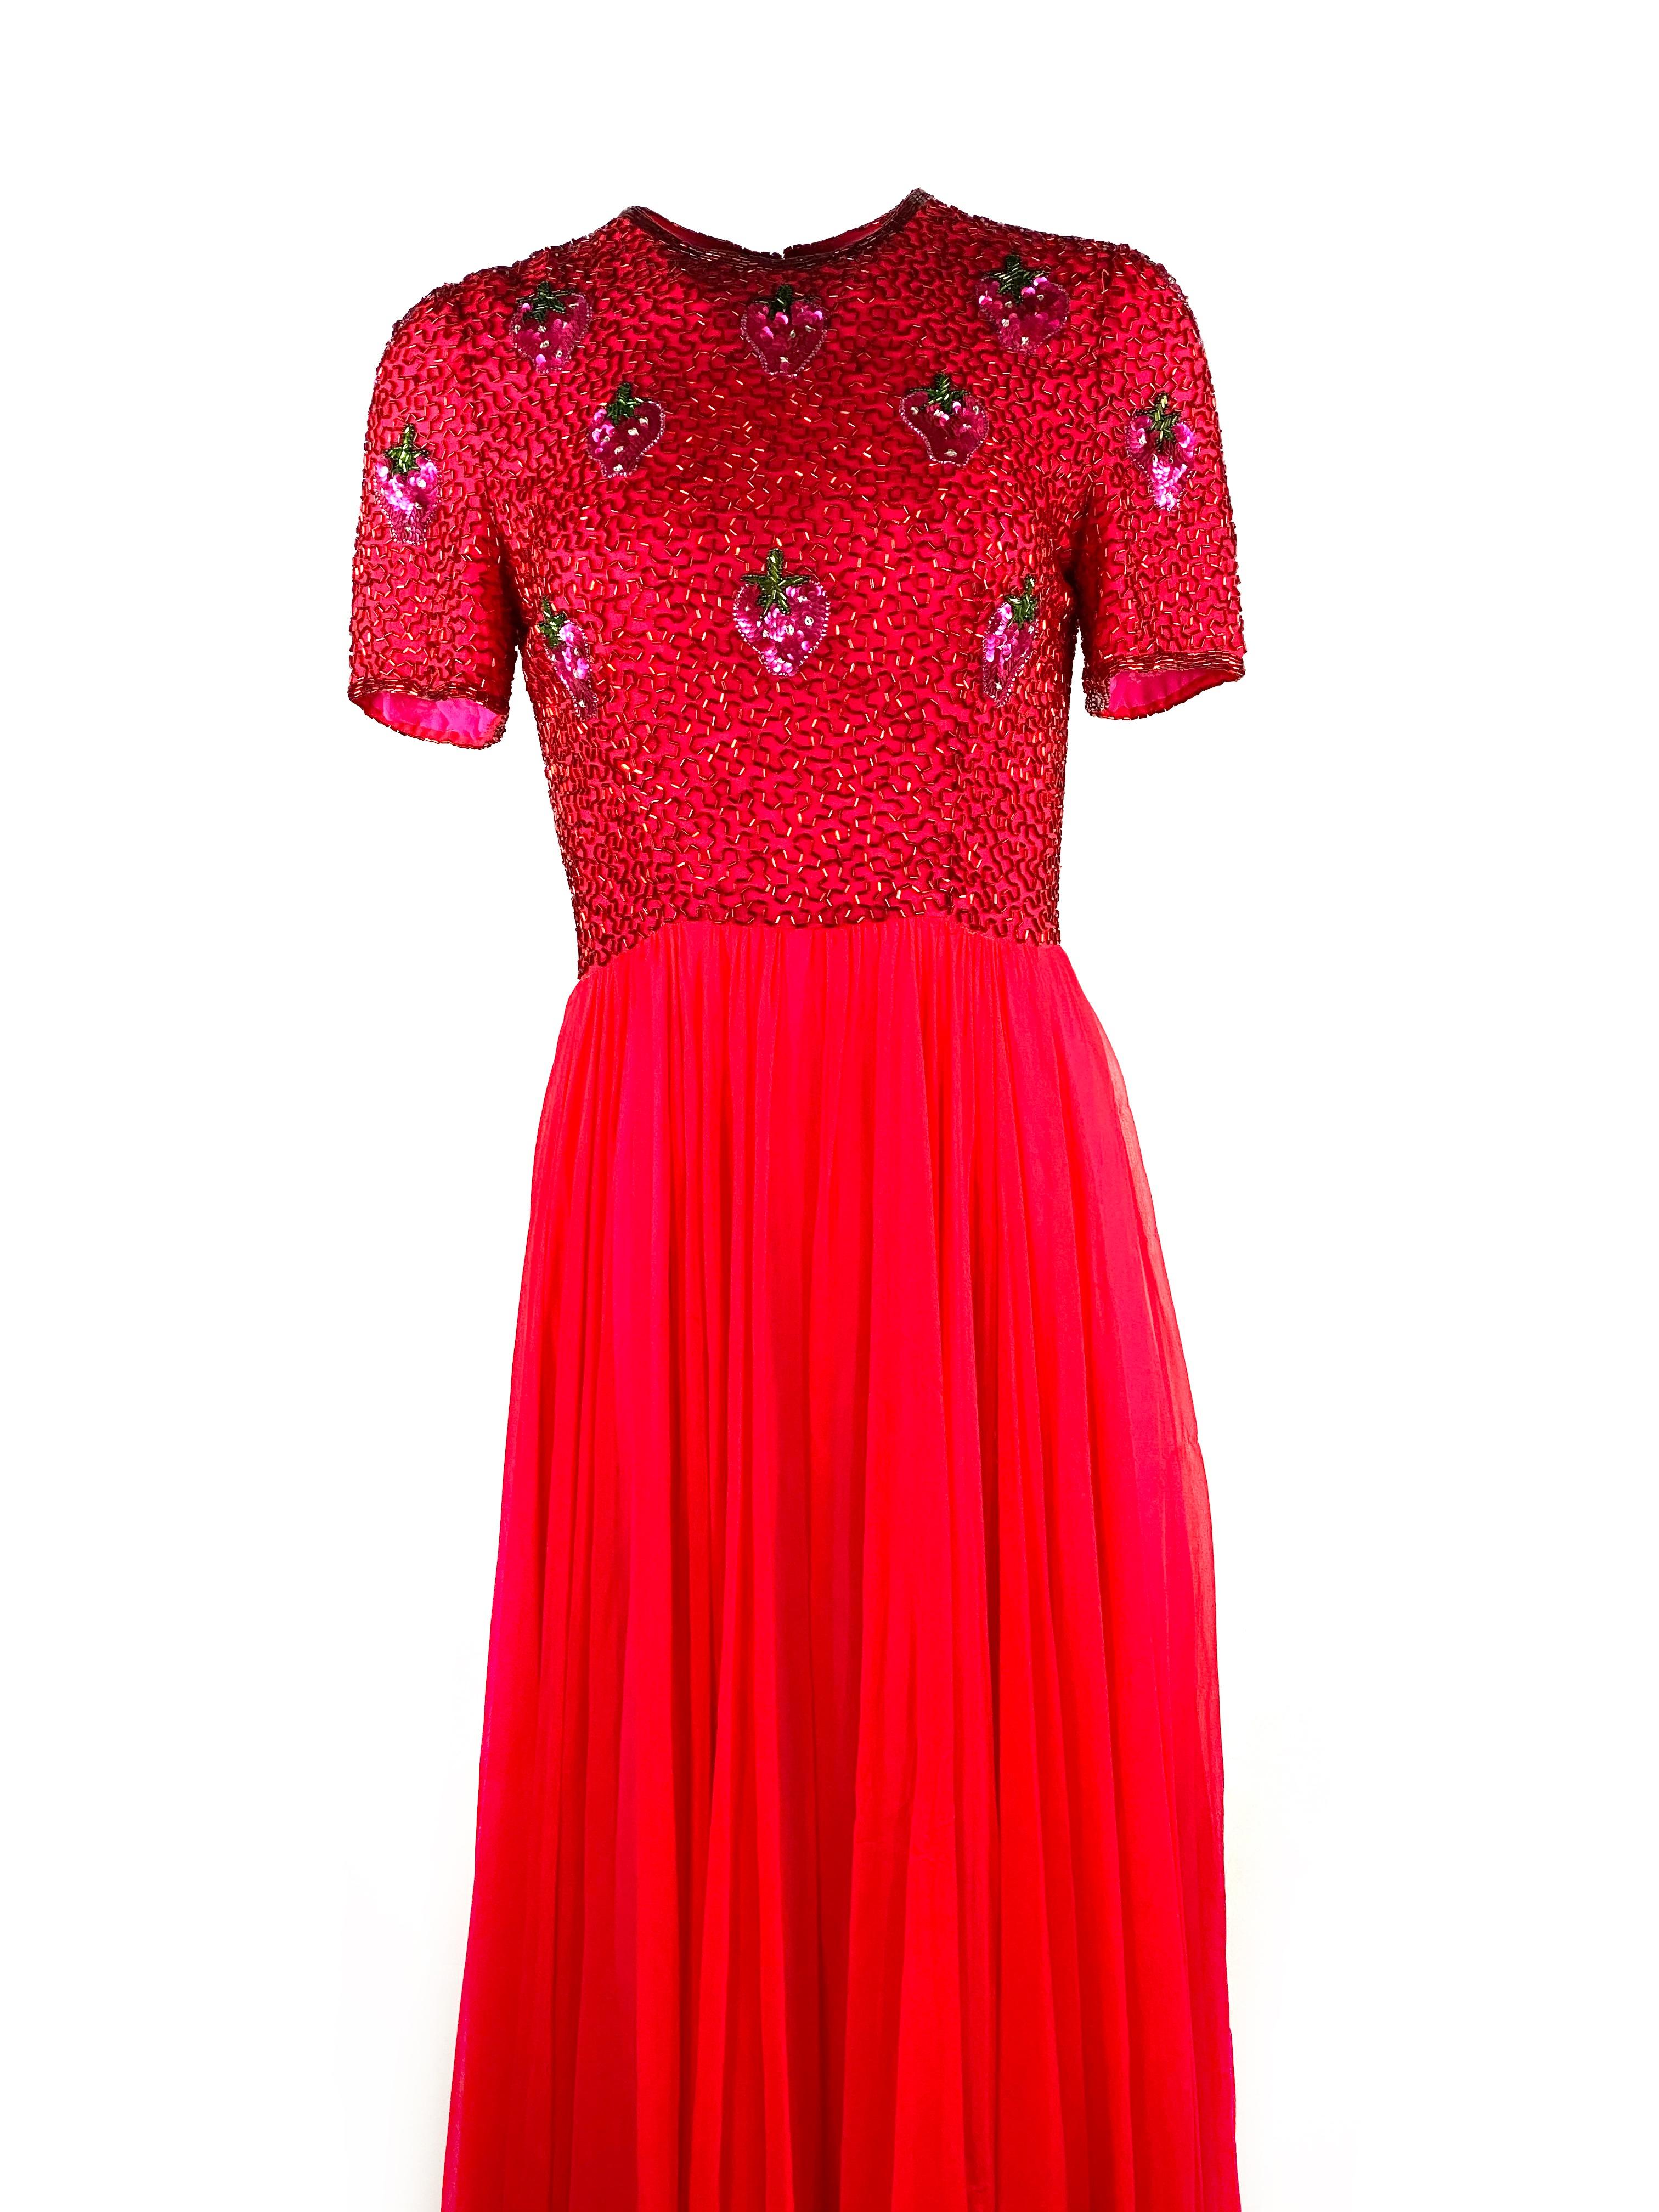 Vintage BOB MACKIE Red and Pink Strawberry Maxi Evening Dress Gown Size 10

Product details:
Size 10
Short sleeves, measure 8.75” from the shoulder
Featuring sequin strawberry pattern detail
Rear zip and hook closure
Made in USA
